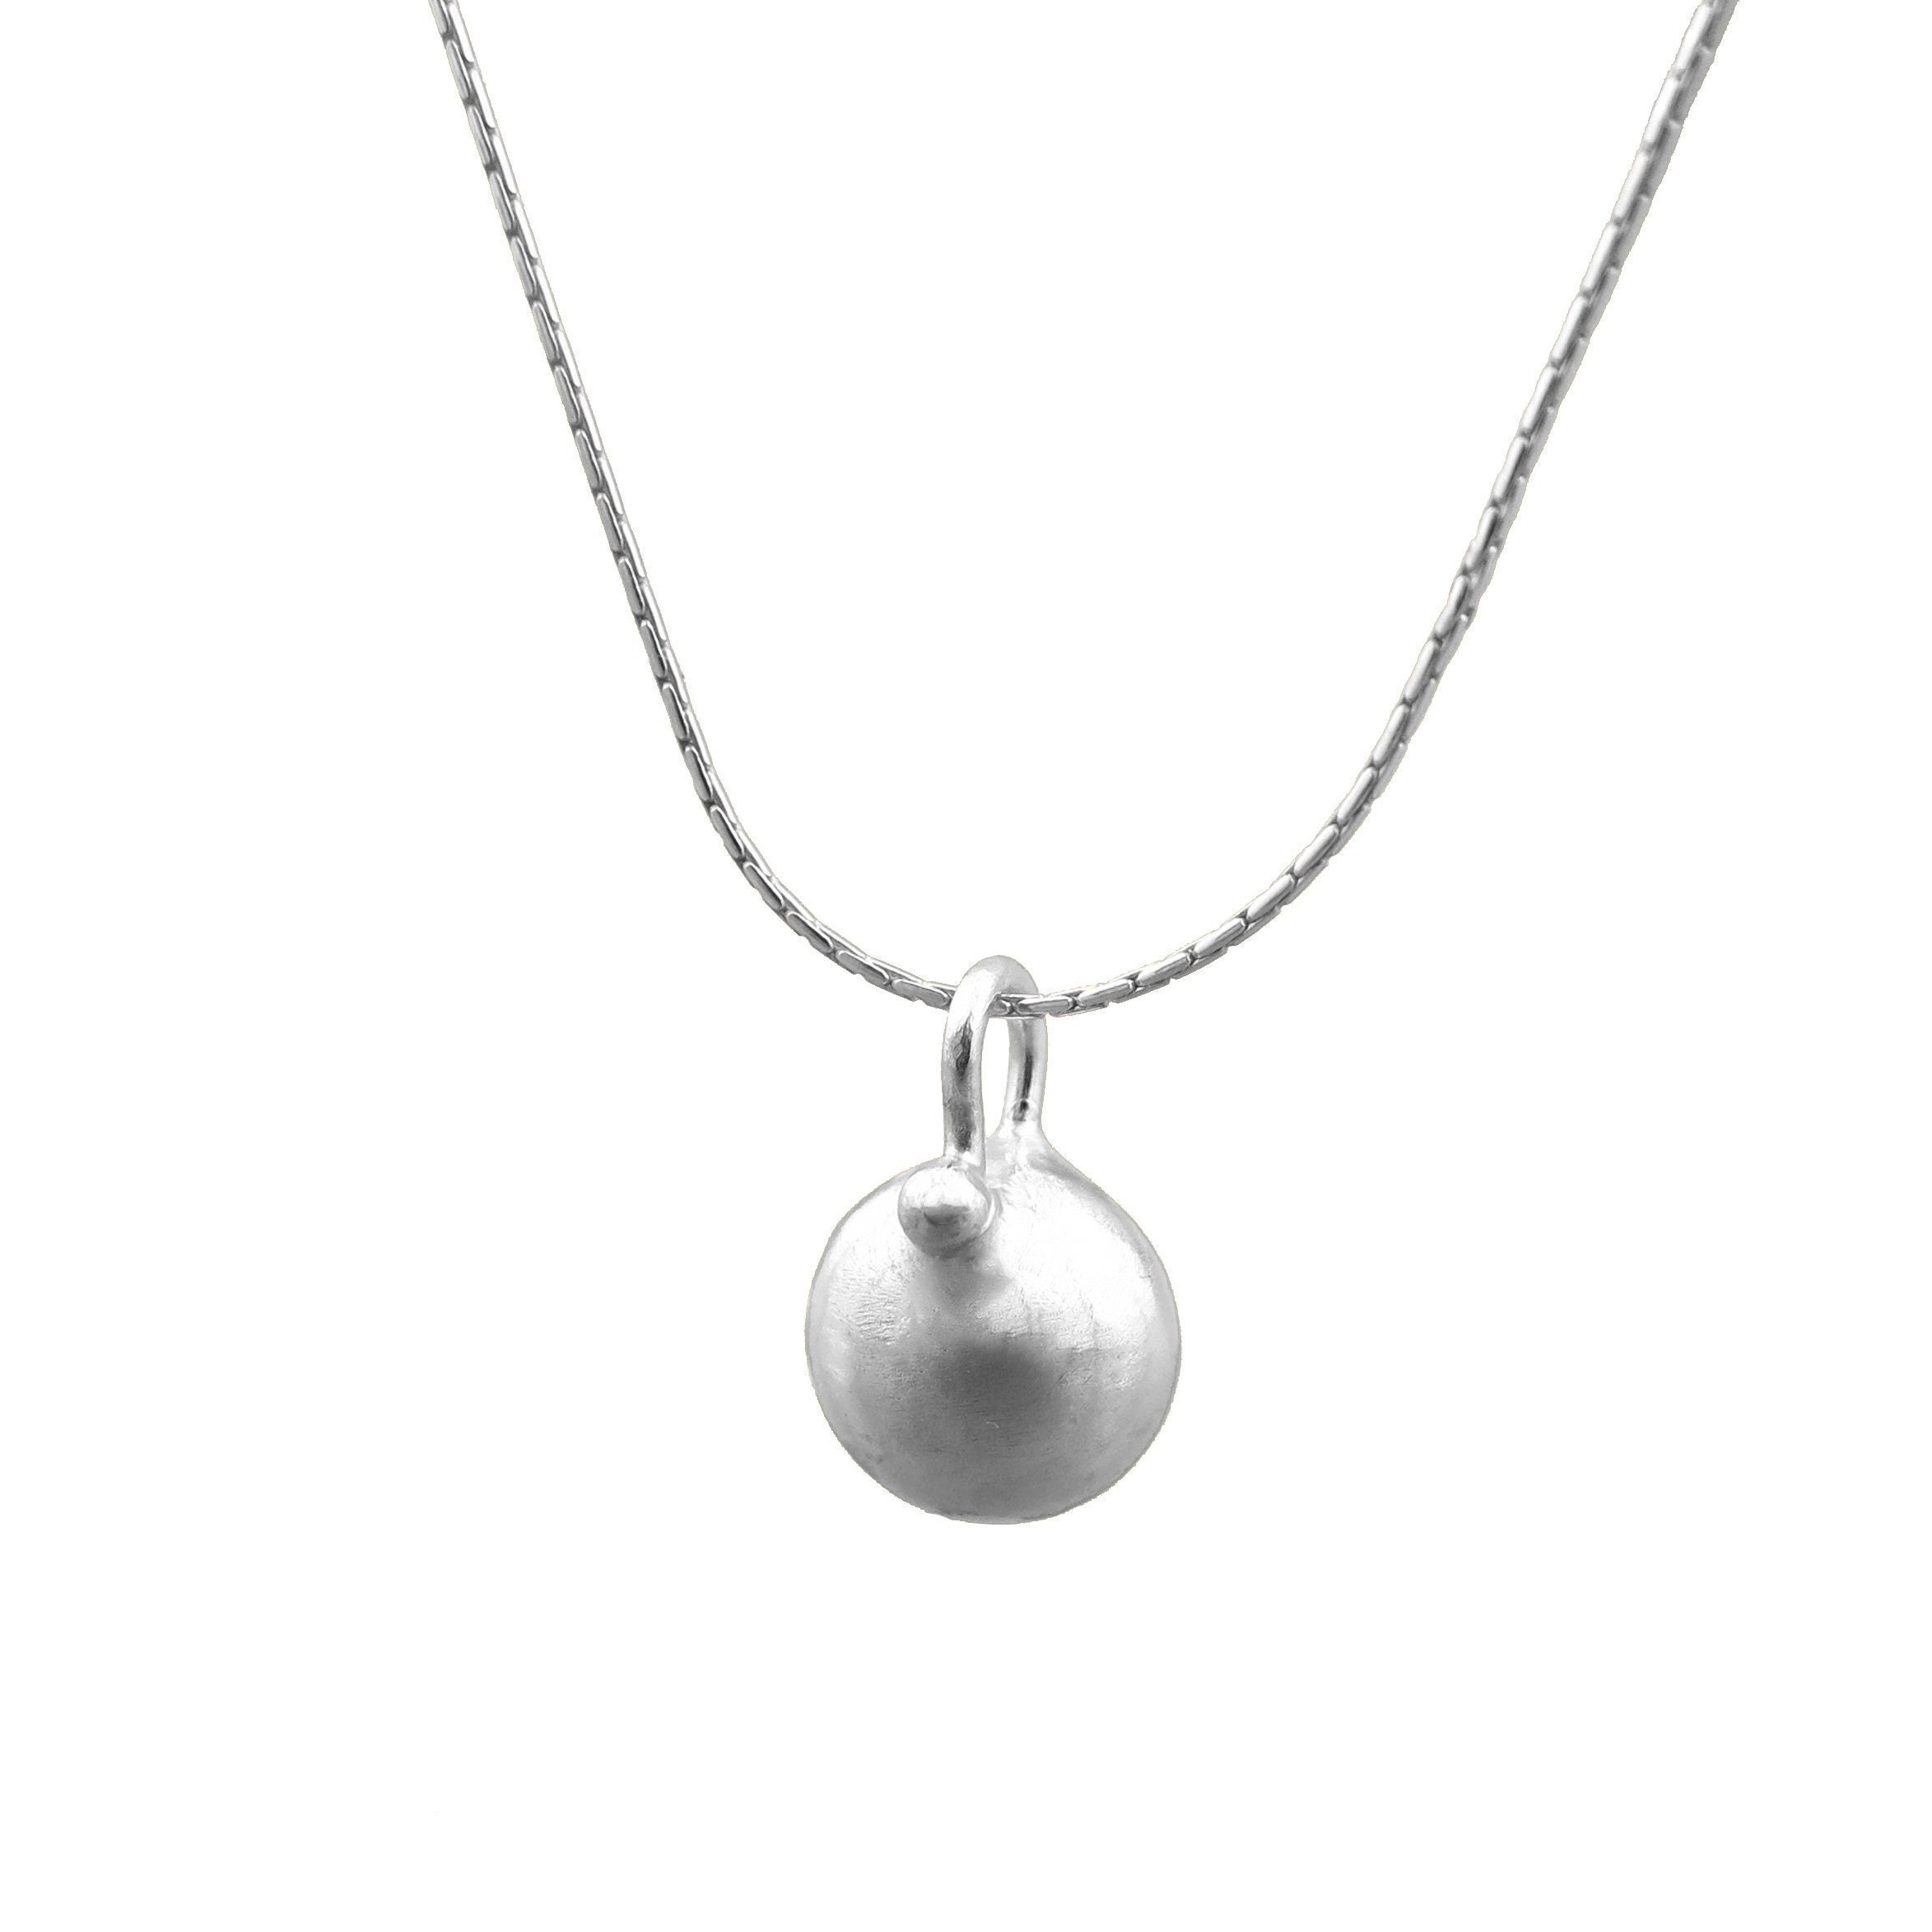 Orb Woven Necklace / Sterling Silver / Fine Silver / 14k Rose Gold